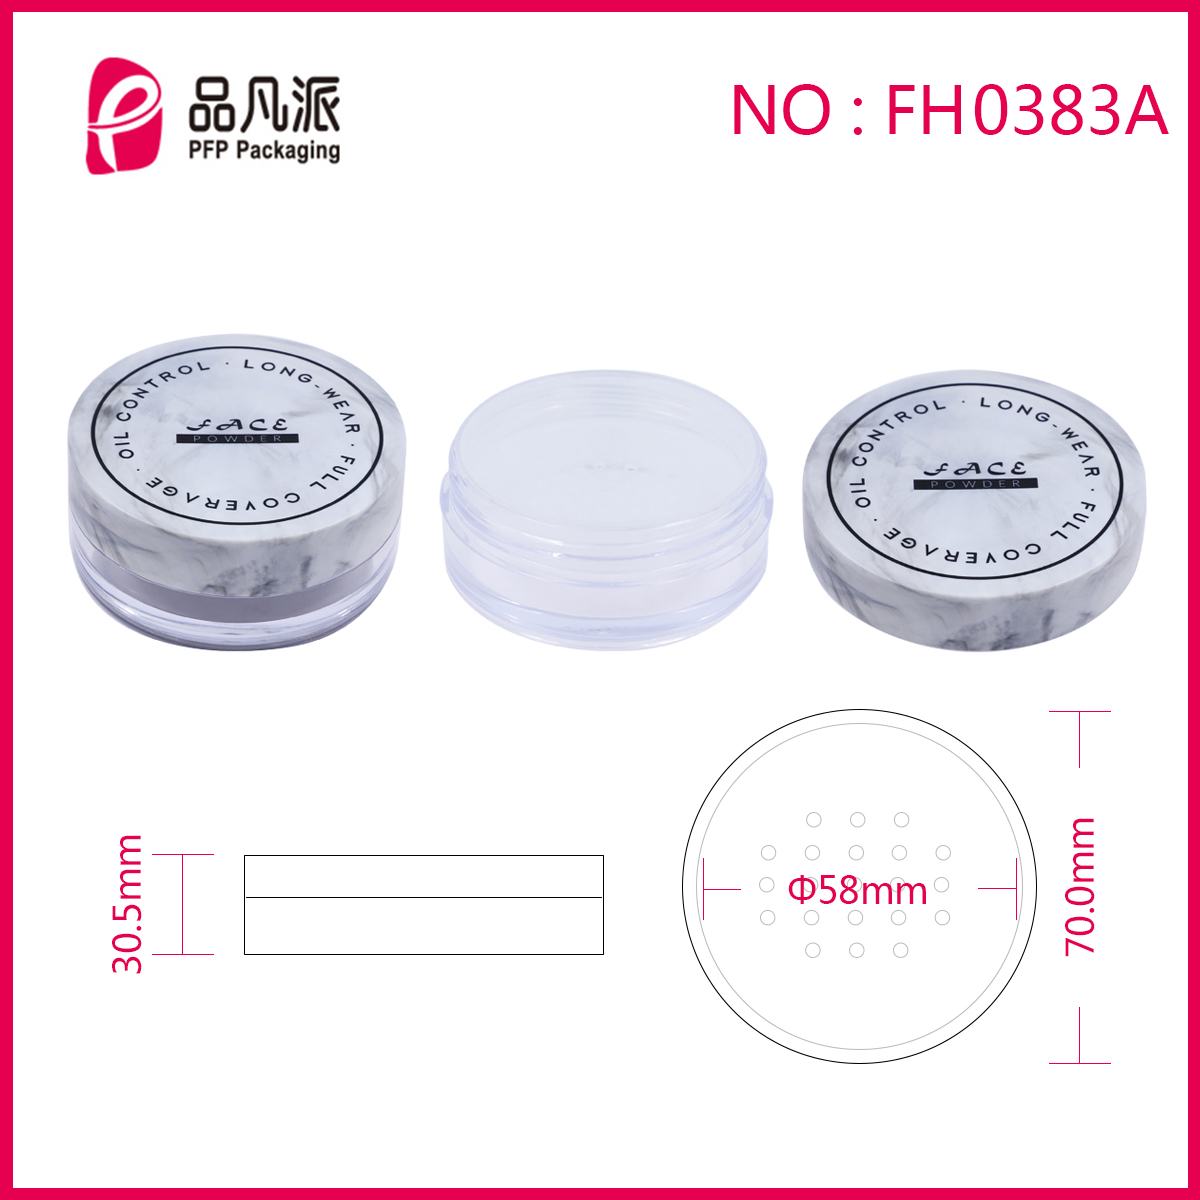 Empty Powder Case Cosmetic Container FH0383